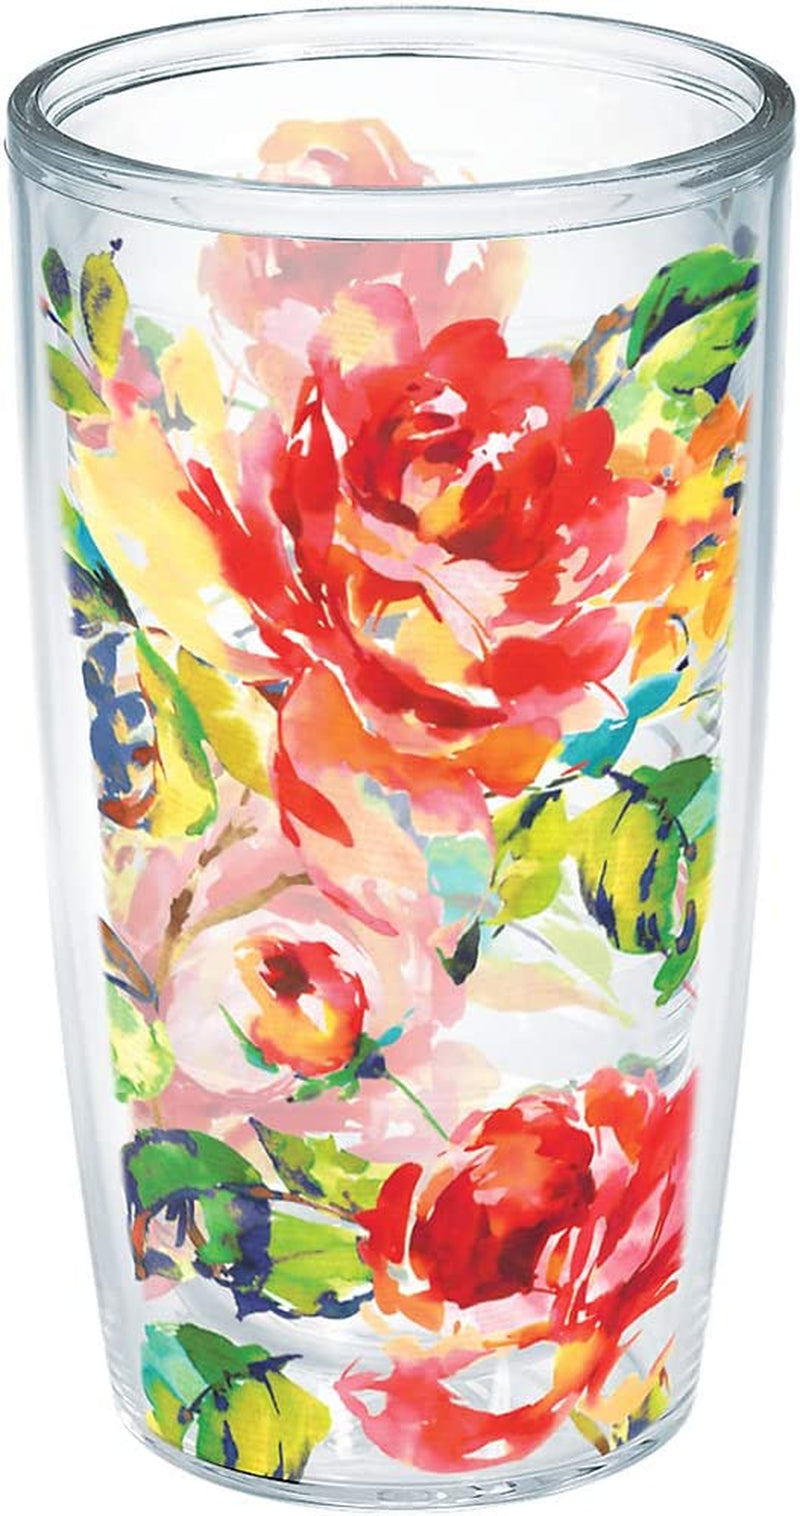 Tervis Triple Walled Fiesta Insulated Tumbler Cup Keeps Drinks Cold & Hot, 20Oz - Stainless Steel, Floral Bouquet Home & Garden > Kitchen & Dining > Tableware > Drinkware Tervis Classic 16oz - No Lid 